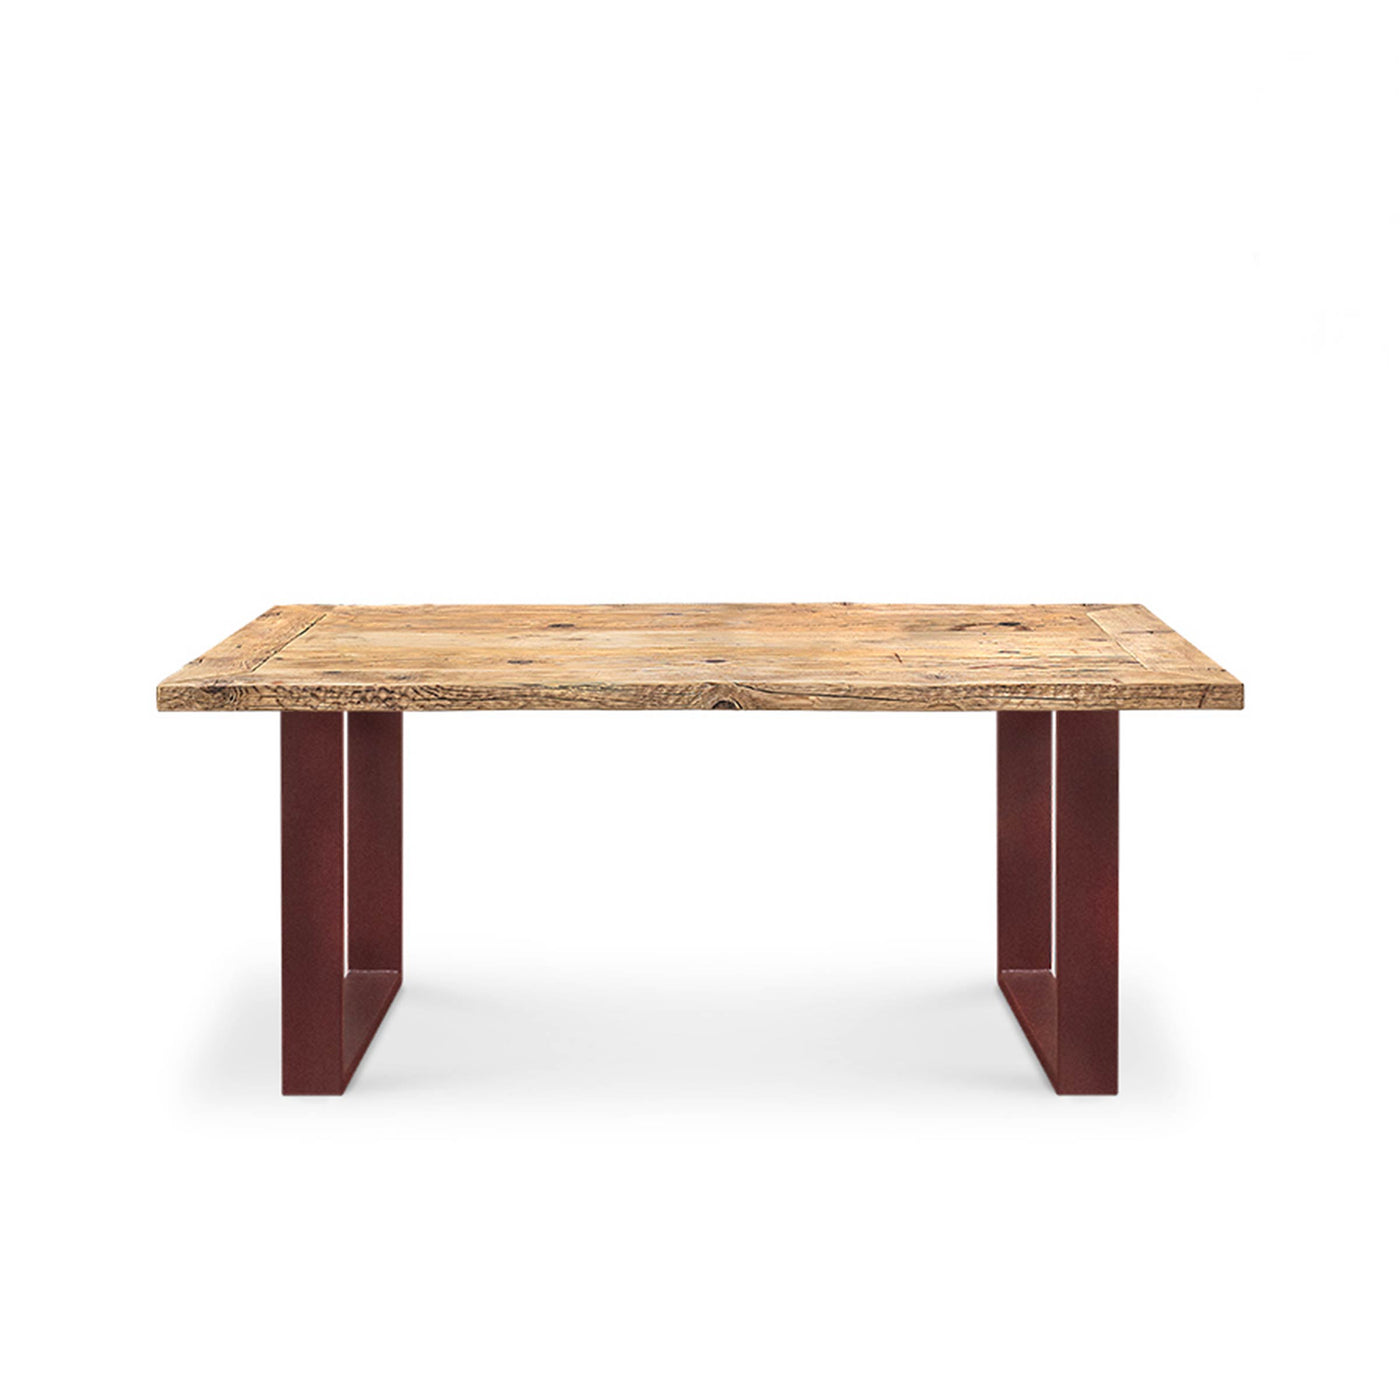 Wood Dining Table MAXIMO Six Seater by Giuseppe Mazzardi for Inventoom 07